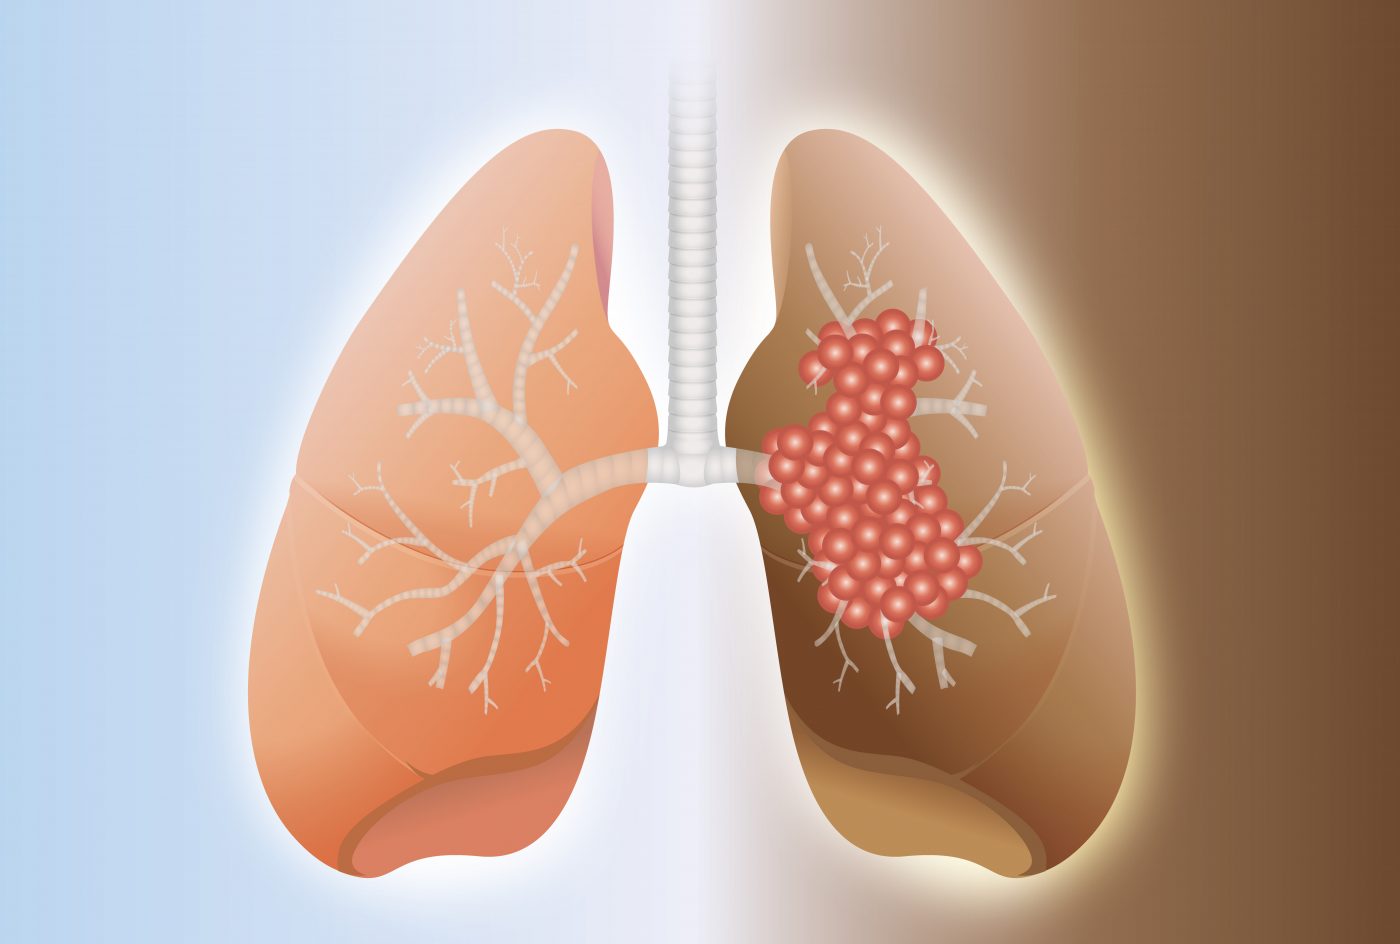 Lung fibrosis